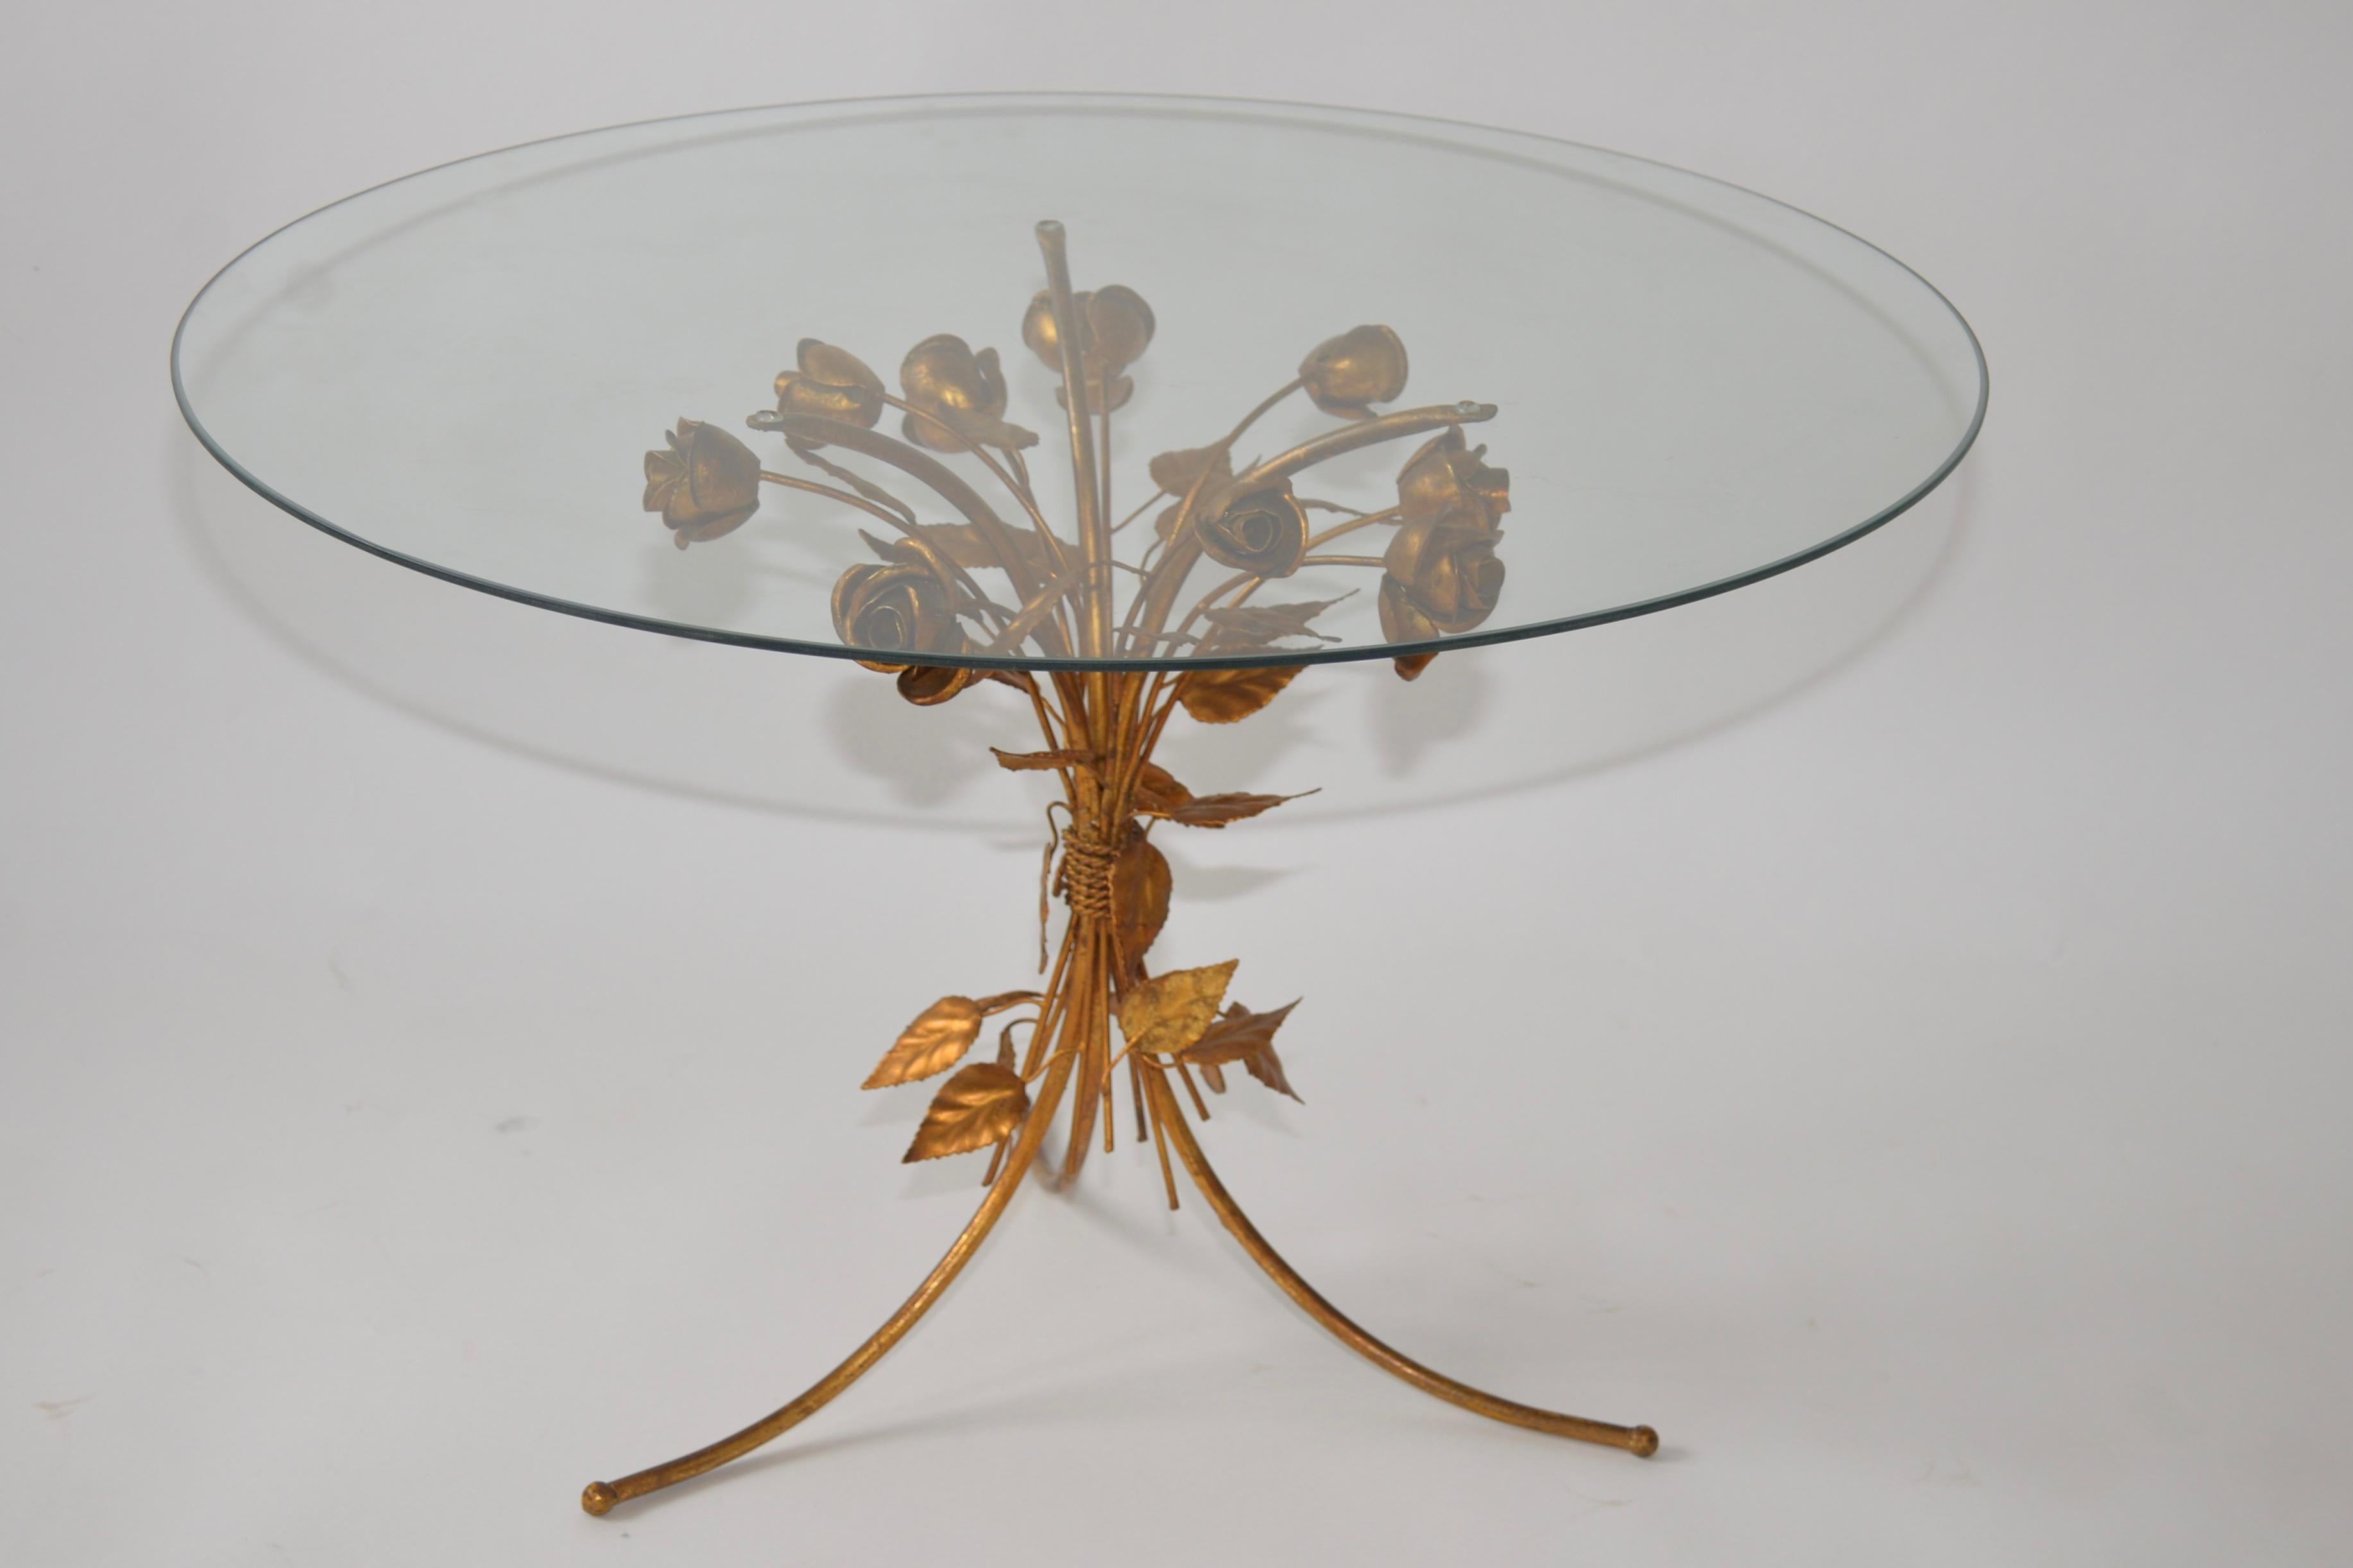 A Hans Kögl Hollywood Regency side table that features gold gilt metal tripod base of flowers and leaves with a glass top. This is a lovely intricate piece from the well-known and well documented German designer.